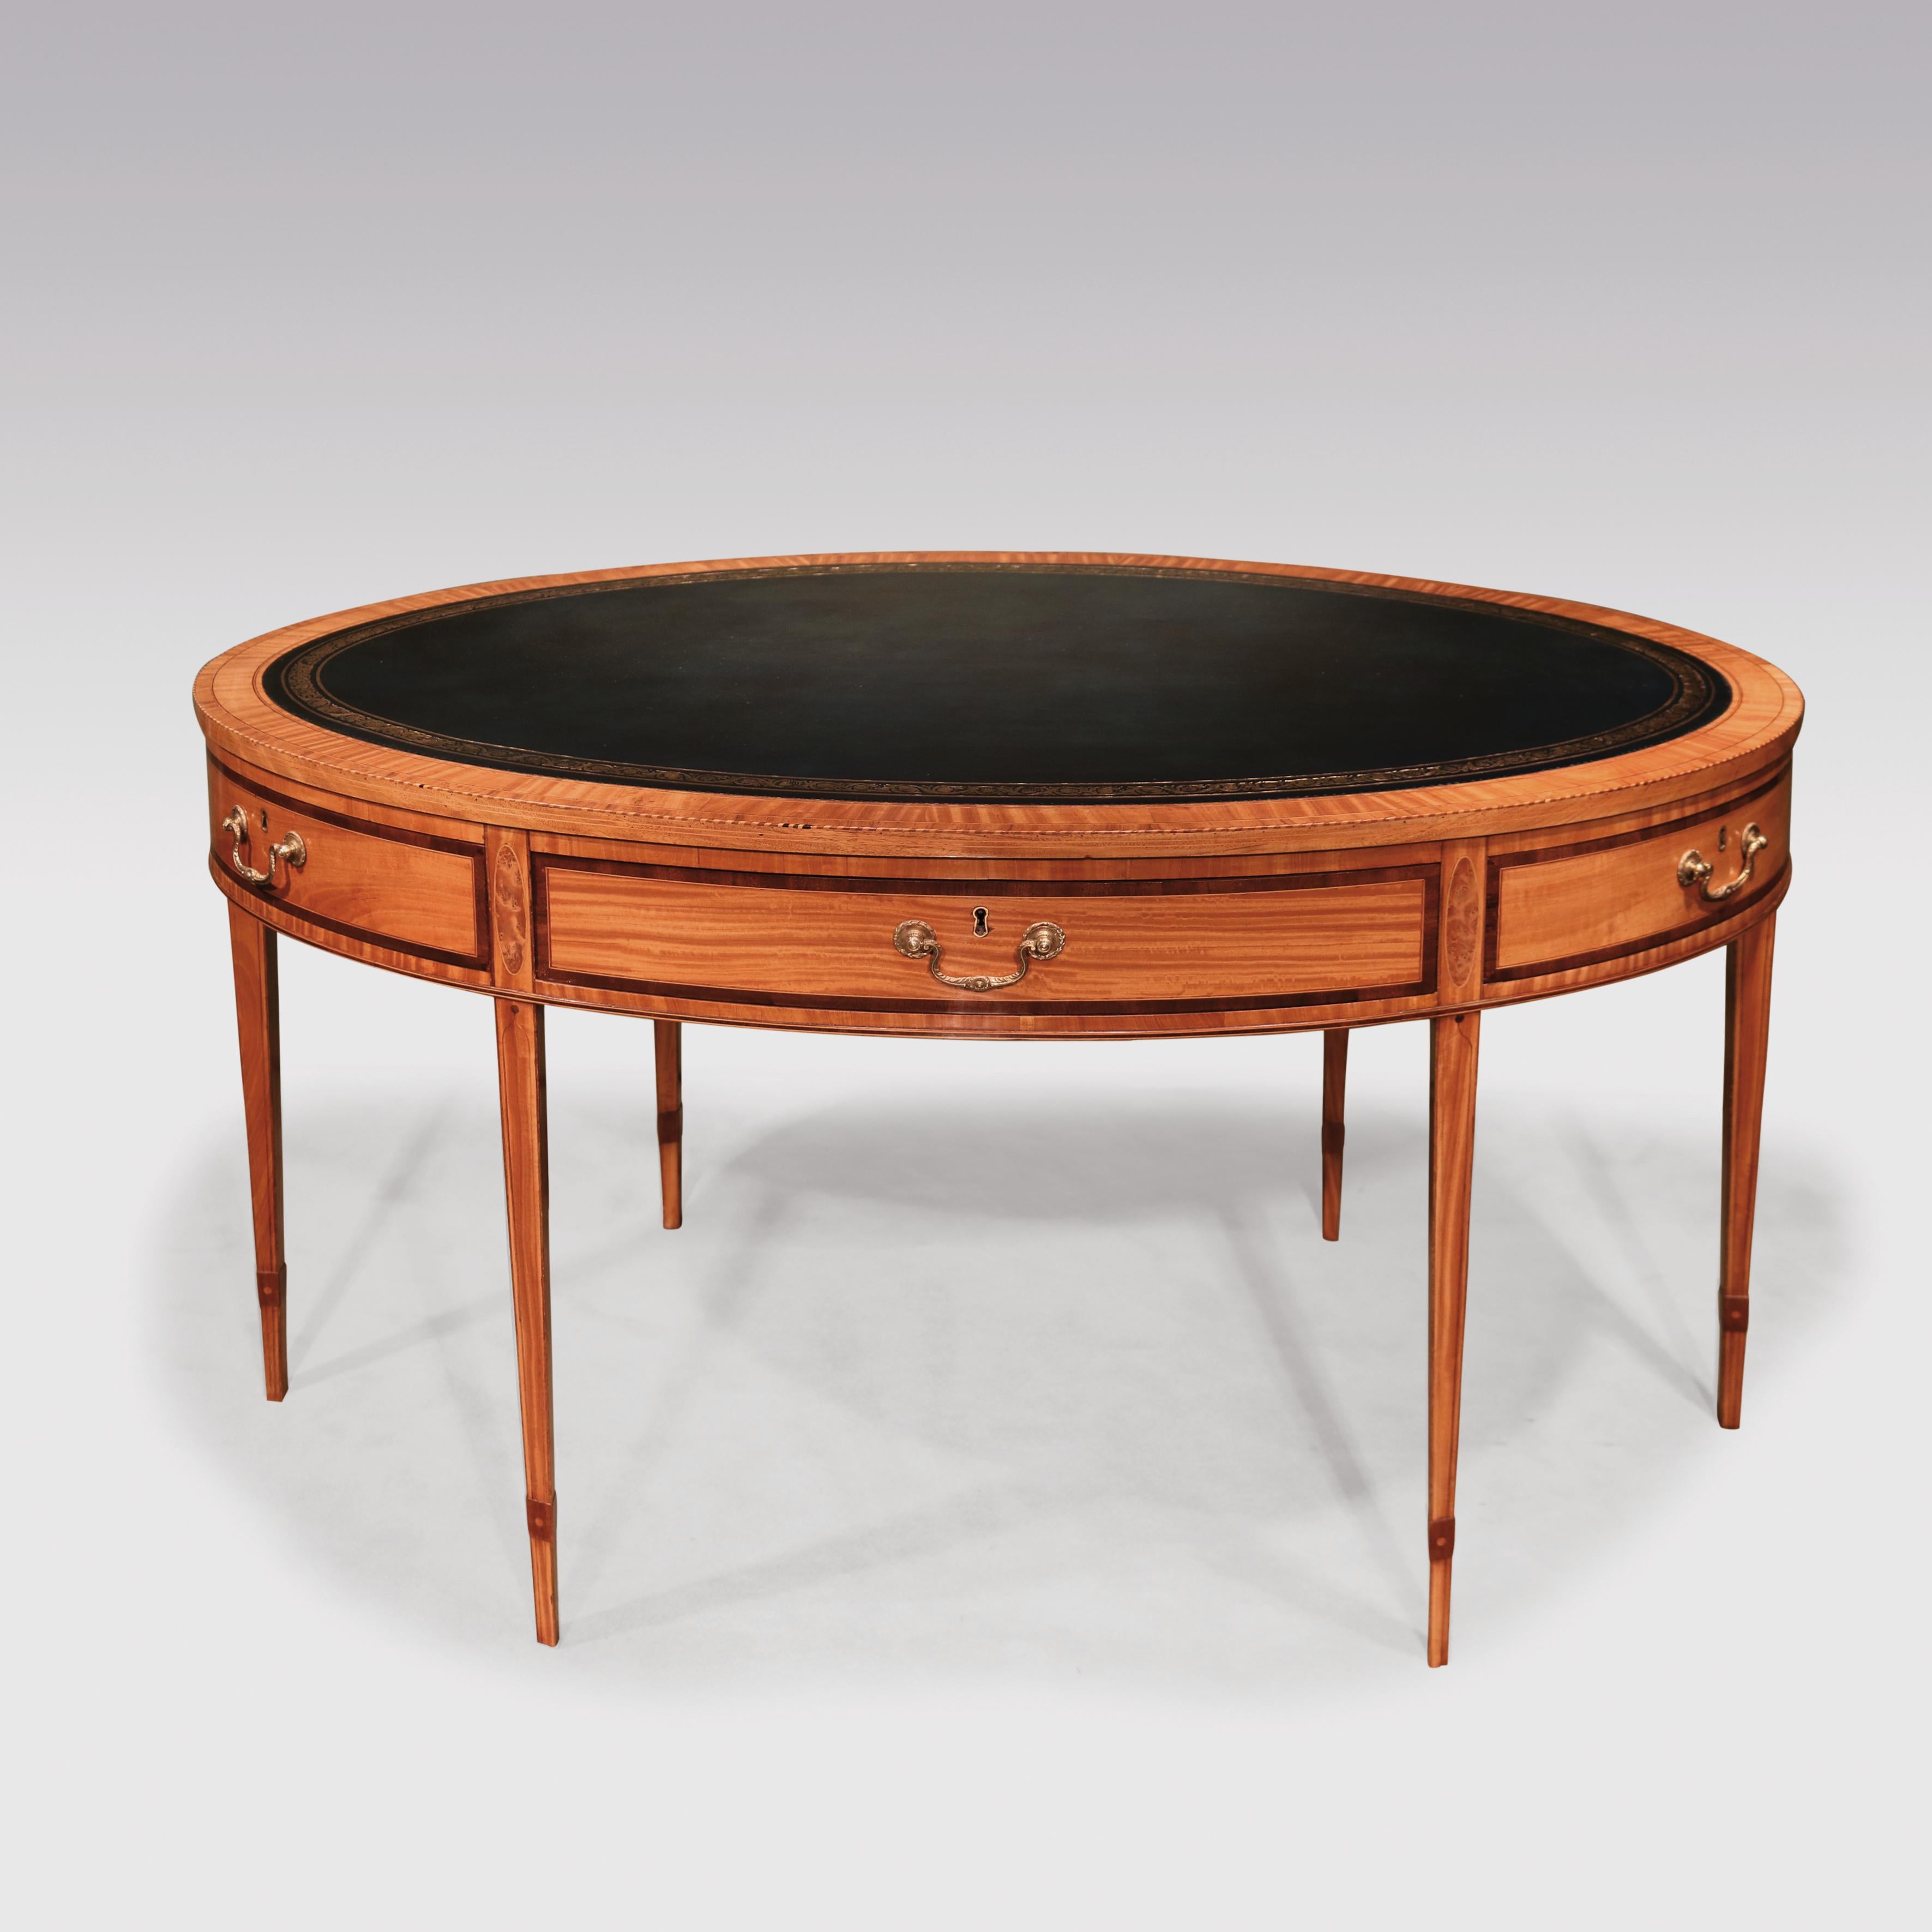 English Mid-19th Century Satinwood Oval Writing Table in the Sheraton Manner